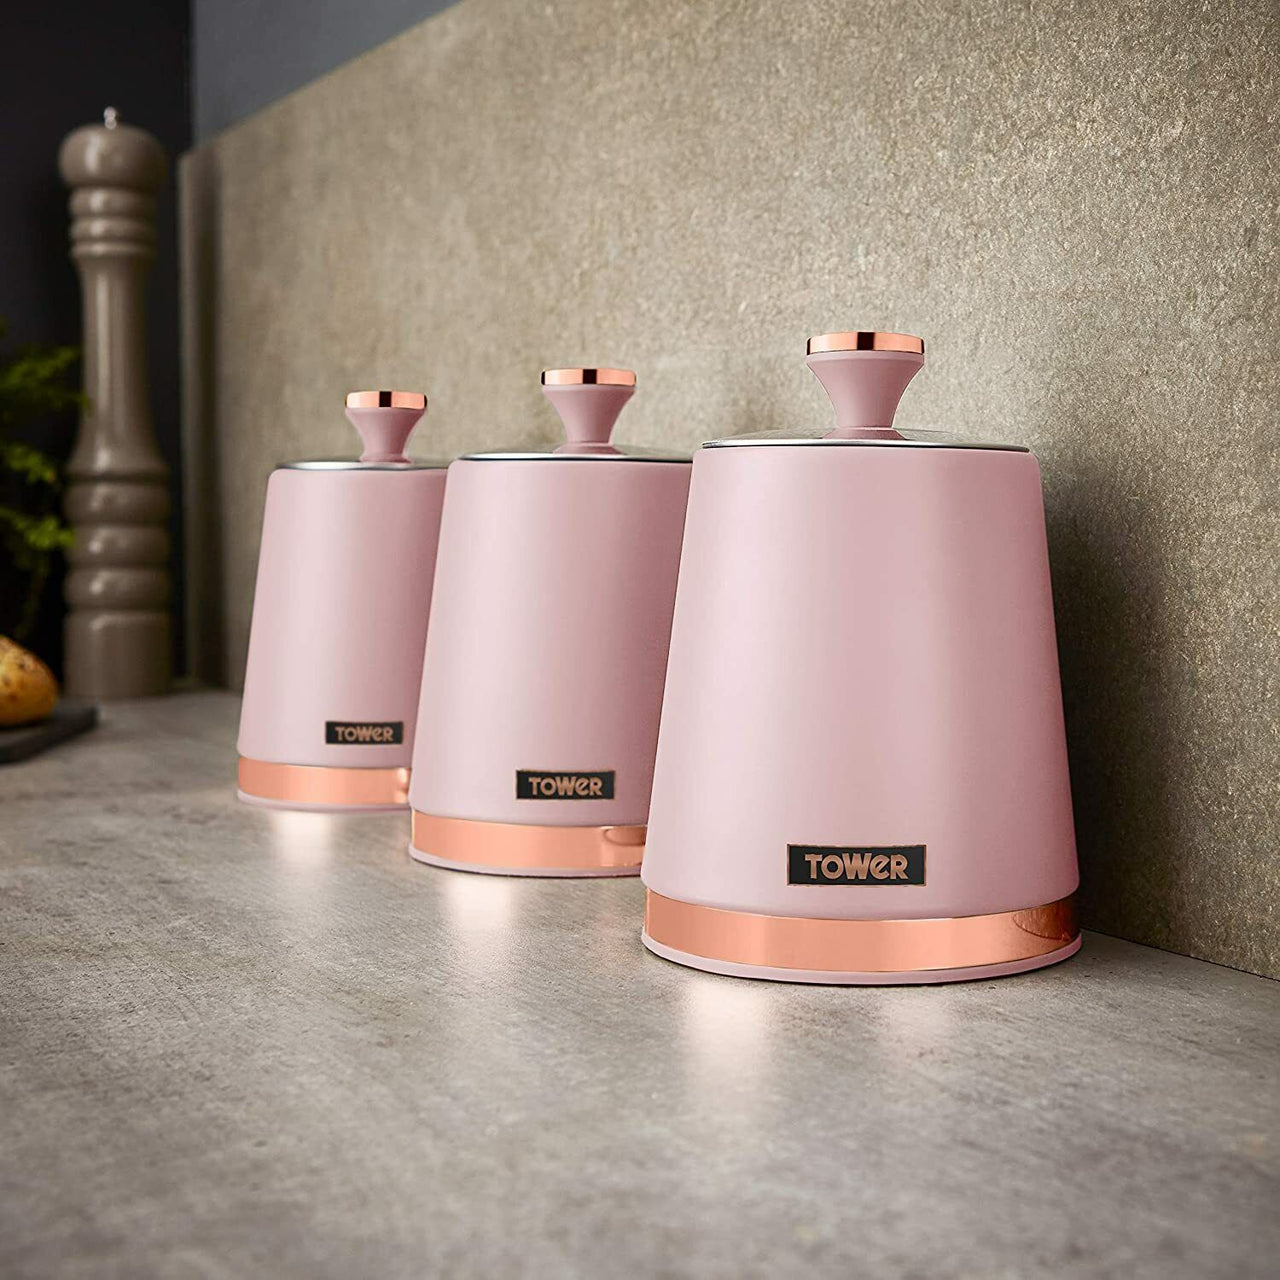 Tower Cavaletto Bread Bin, Canisters, Mug Tree & Towel Pole Set Pink & Rose Gold